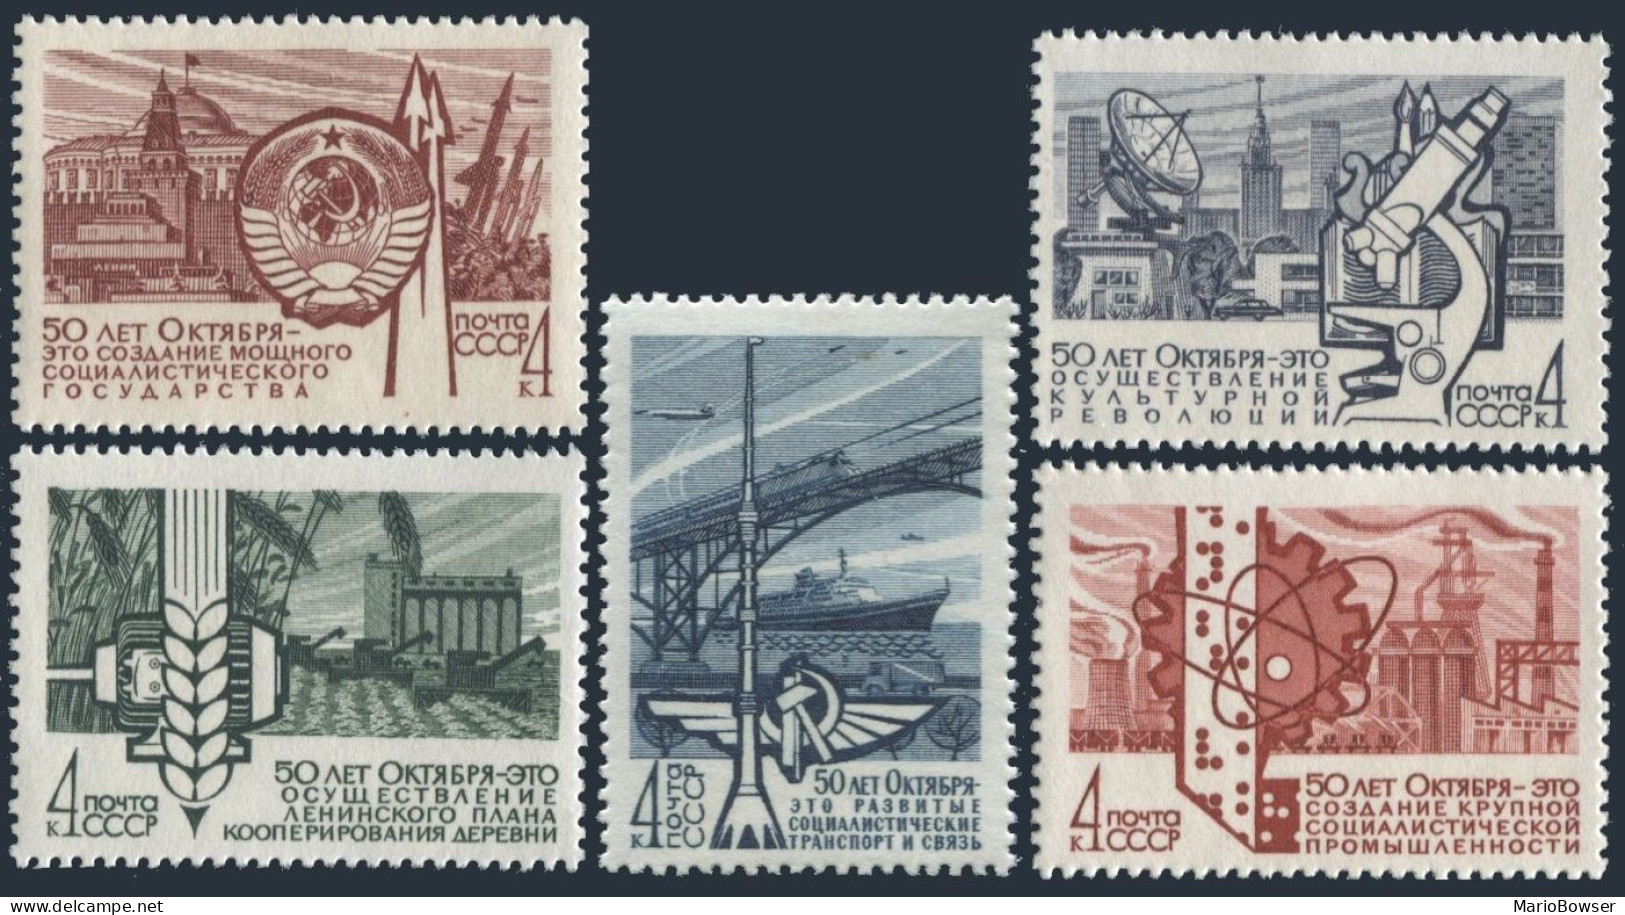 Russia 3414-3418, MNH. Michel 3435-3439. Communism Technical Base, 1967. - Unused Stamps